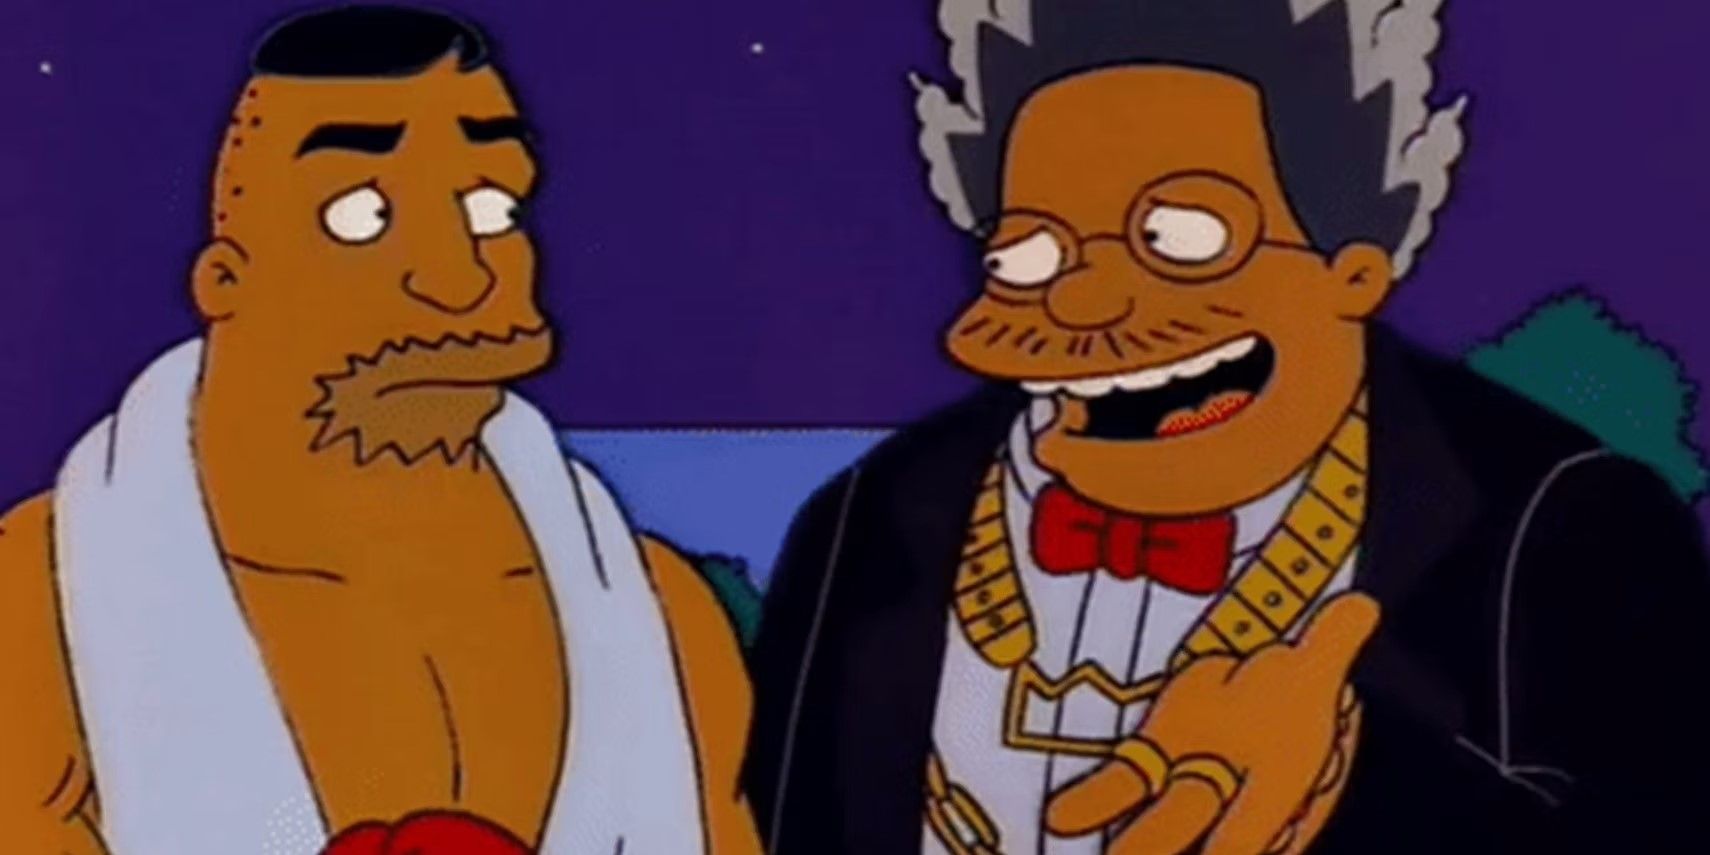 Drederick and Lucius in the ring in The Simpsons